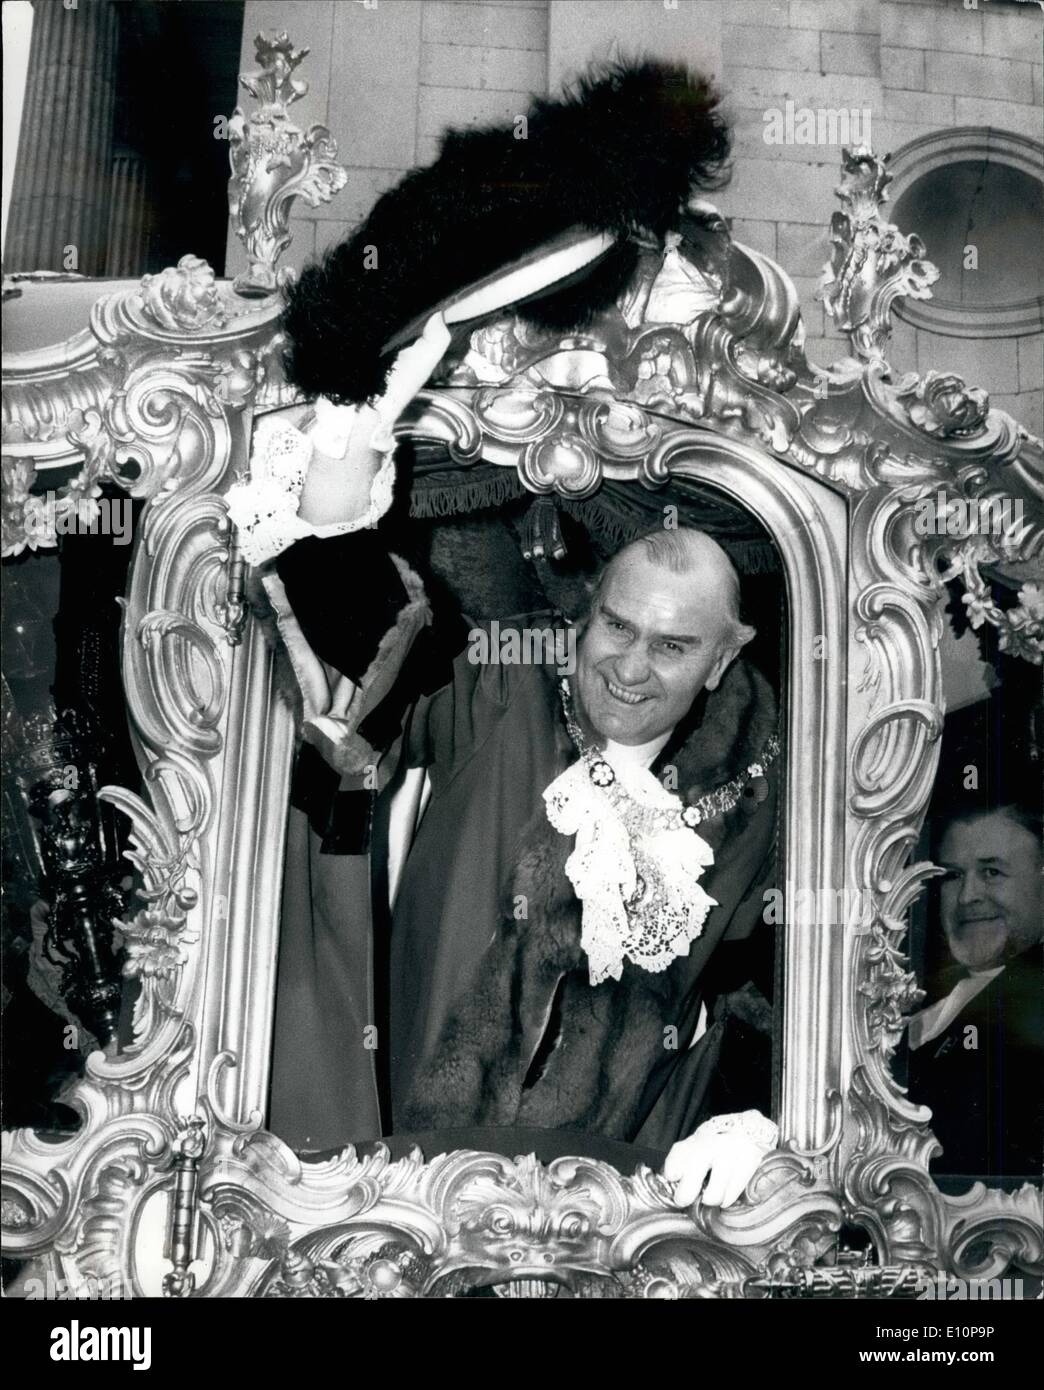 Nov. 11, 1973 - The Lord Mayor's annual spectacular show: It was carnival time in the City of London today when the annual spectacular Lord Mayor's Show came to town. Sir Lindsay Ring, the City's 648th Lord Mayor, made ''Young at Heart'' the theme for his procession. Photo shows London's new Lord Mayor, Sir Lindsay Ring, looks resplendent as he learns from his golden state coach before moving off in the procession today. Stock Photo